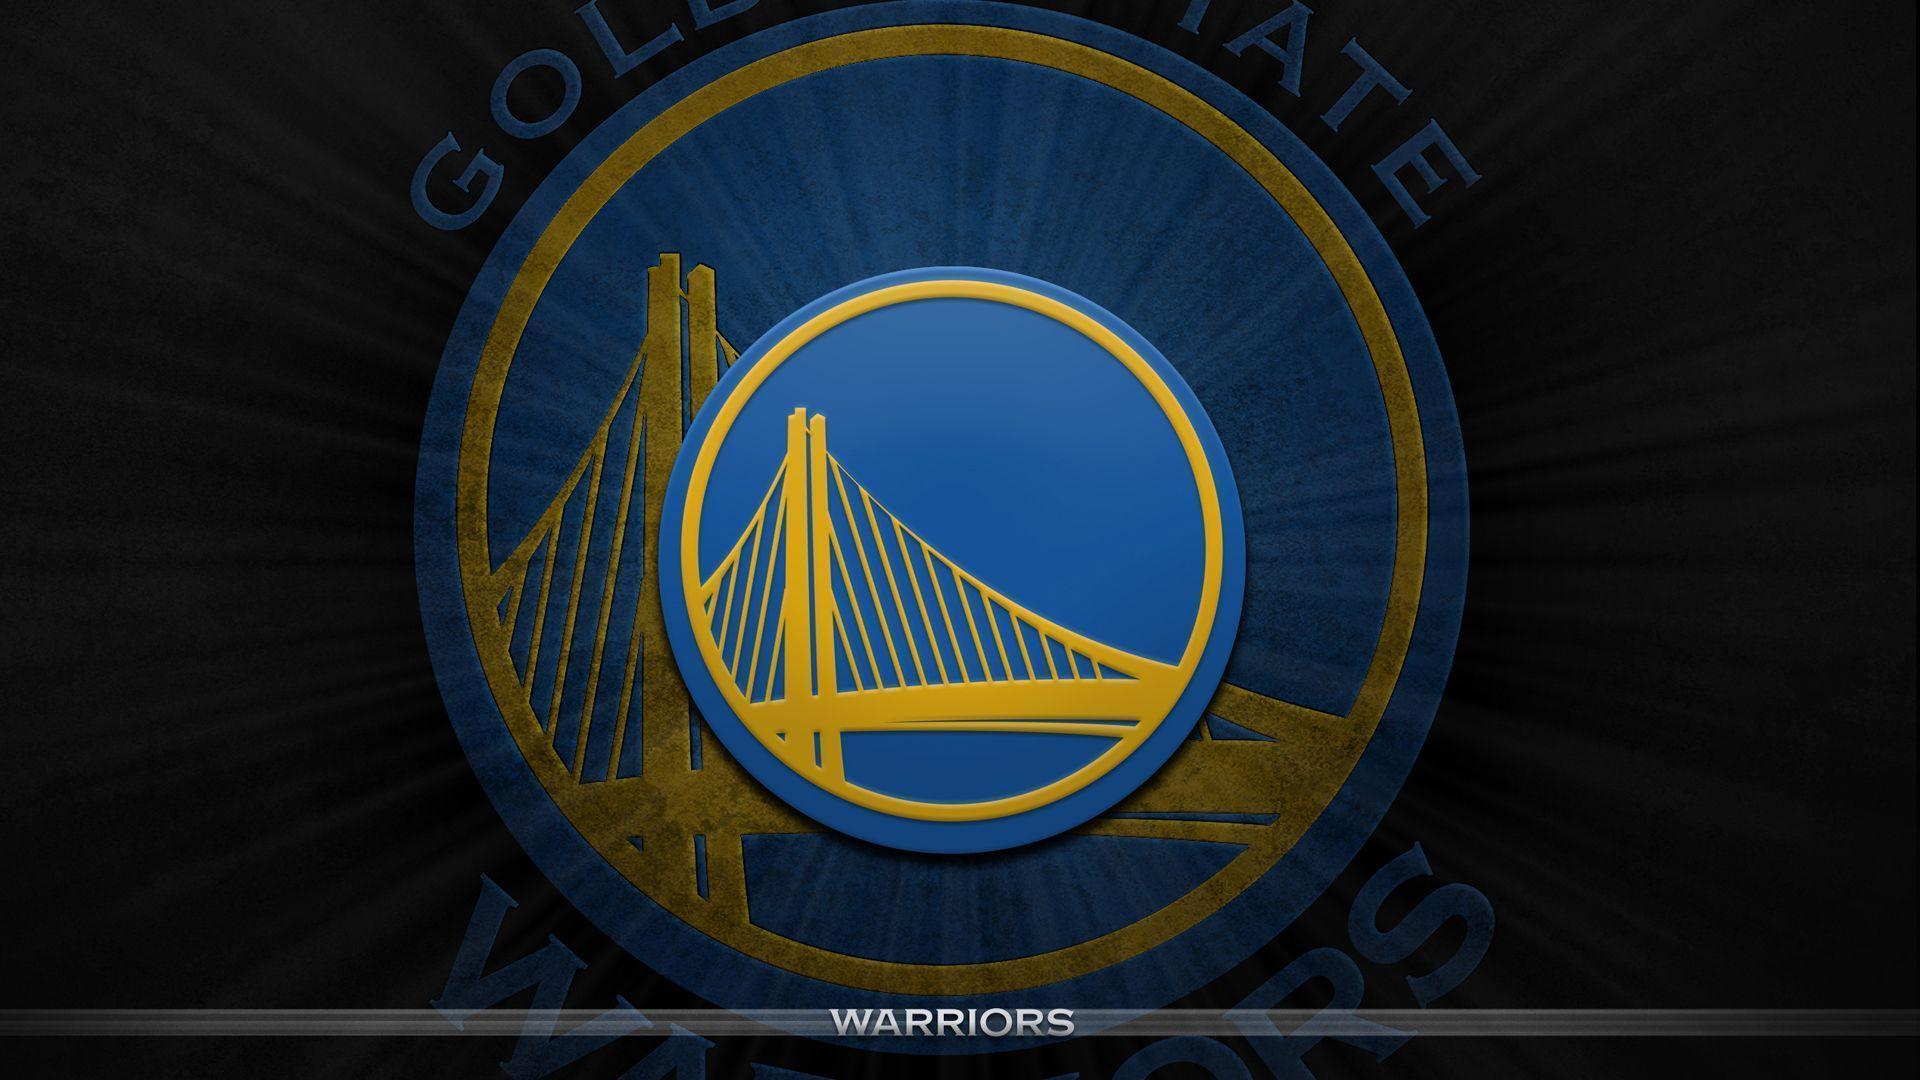 Golden State Warriors Wallpaper Image Photo Picture Background